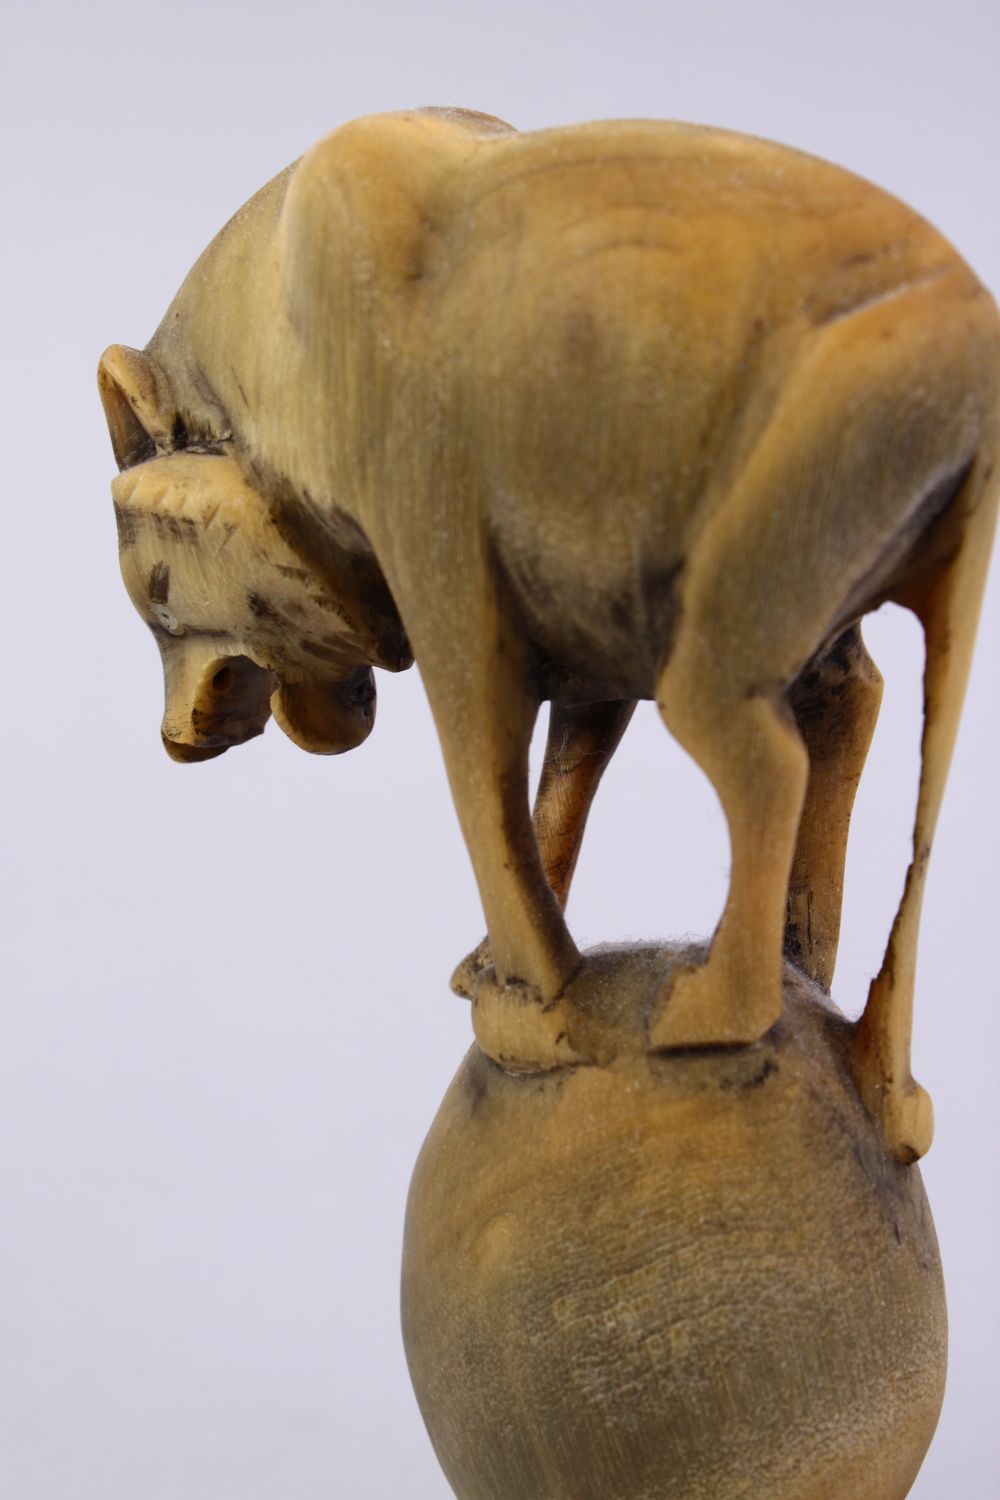 A PAIR OF CARVED HORN WOLF FIGURES, stood on balls mounted to wooden bases, 15.5cm. - Image 6 of 6